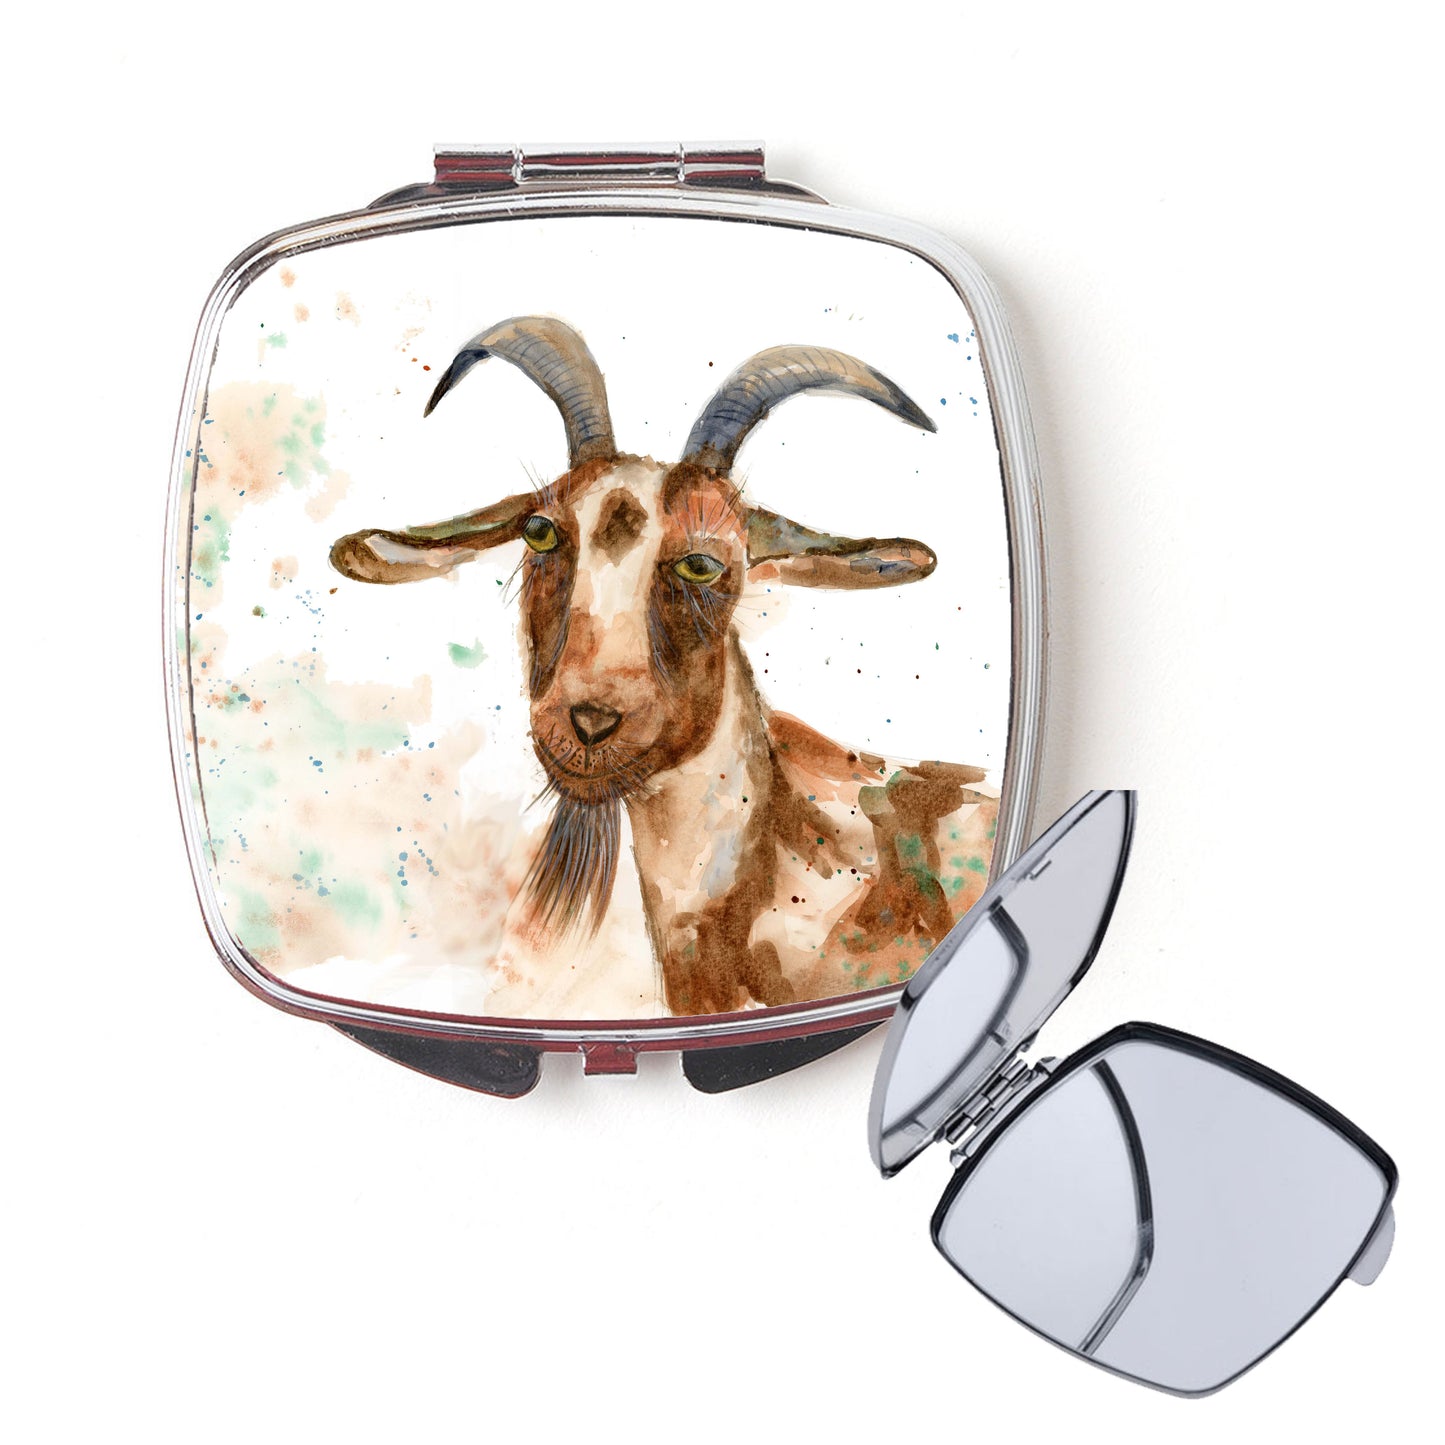 Goat compact mirror